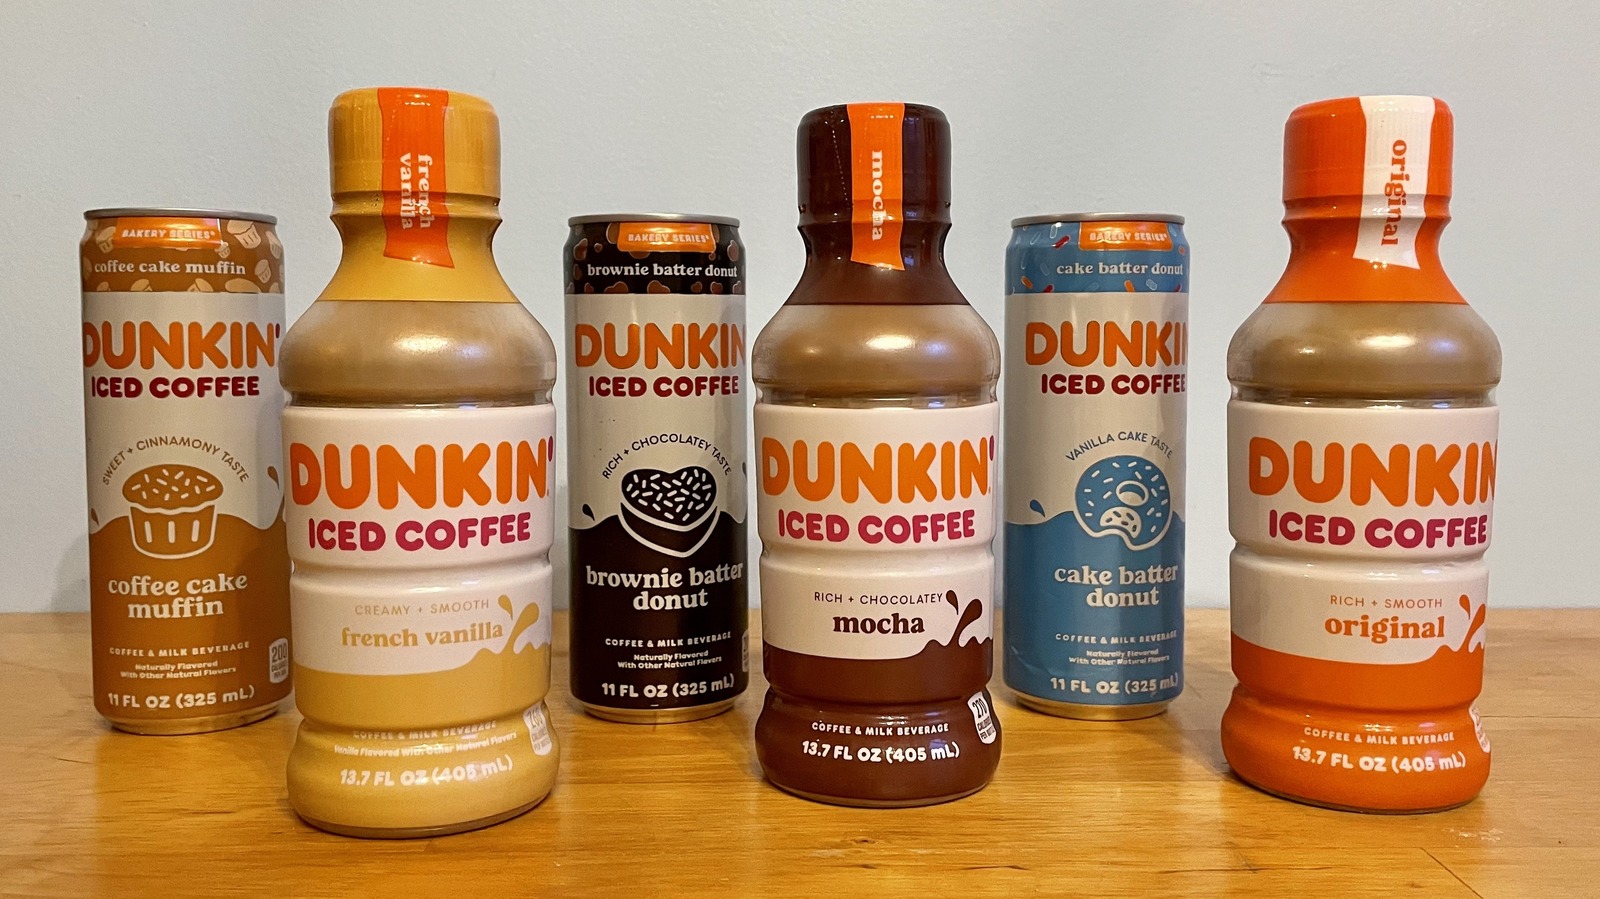 https://www.mashed.com/img/gallery/canned-dunkin-coffee-vs-bottled-which-tastes-better/l-intro-1699210563.jpg